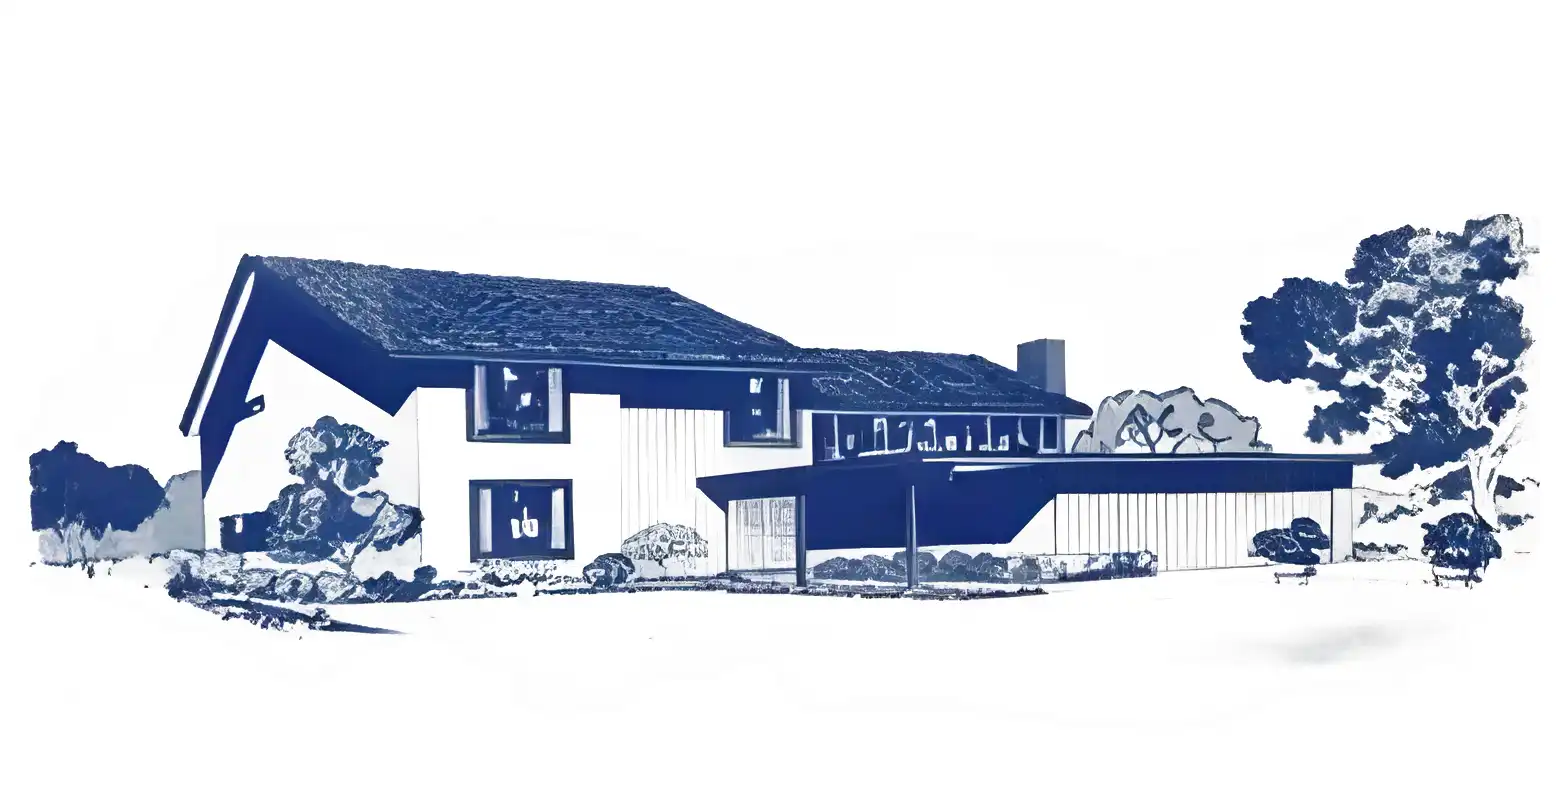 Monochrome rendering of 1960s 2 story house, variant with flat roofed garage and gabled main house.